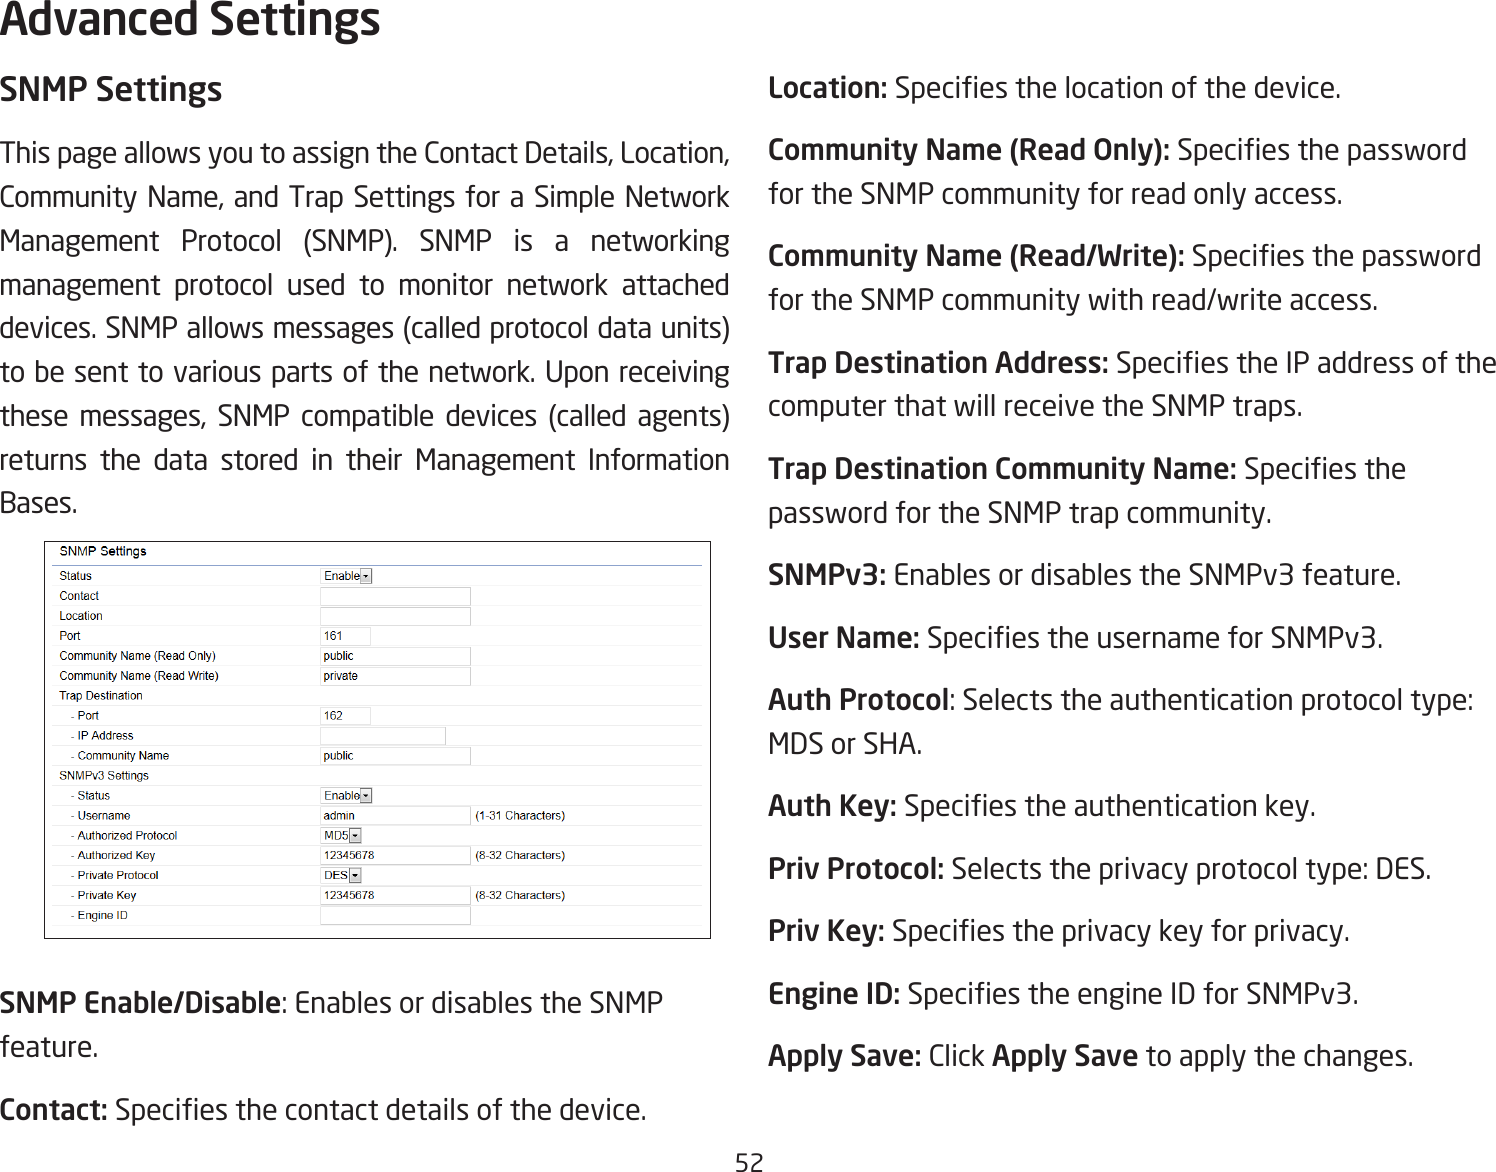 52SNMP SettingsThis page allows you to assign the Contact Details, Location, Community Name, and Trap Settings for a Simple Network Management Protocol (SNMP). SNMP is a networkingmanagement protocol used to monitor network attached devices.SNMPallowsmessages(calledprotocoldataunits)tobe senttovariouspartsofthenetwork.Uponreceivingthese messages, SNMP compatible devices (called agents)returns the data stored in their Management Information Bases.SNMP Enable/Disable: Enables or disables the SNMP feature.Contact: Speciesthecontactdetailsofthedevice.Location: Speciesthelocationofthedevice.Community Name (Read Only): Speciesthepasswordfor the SNMP community for read only access.Community Name (Read/Write):Speciesthepasswordfor the SNMP community with read/write access.Trap Destination Address:SpeciestheIPaddressofthecomputer that will receive the SNMP traps.Trap Destination Community Name: Speciesthepassword for the SNMP trap community.SNMPv3: Enables or disables the SNMPv3 feature.User Name:SpeciestheusernameforSNMPv3.Auth Protocol: Selects the authentication protocol type: MDS or SHA.Auth Key: Speciestheauthenticationkey.Priv Protocol: Selects the privacy protocol type: DES.Priv Key: Speciestheprivacykeyforprivacy.Engine ID: SpeciestheengineIDforSNMPv3.Apply Save: Click Apply Save to apply the changes.Advanced Settings